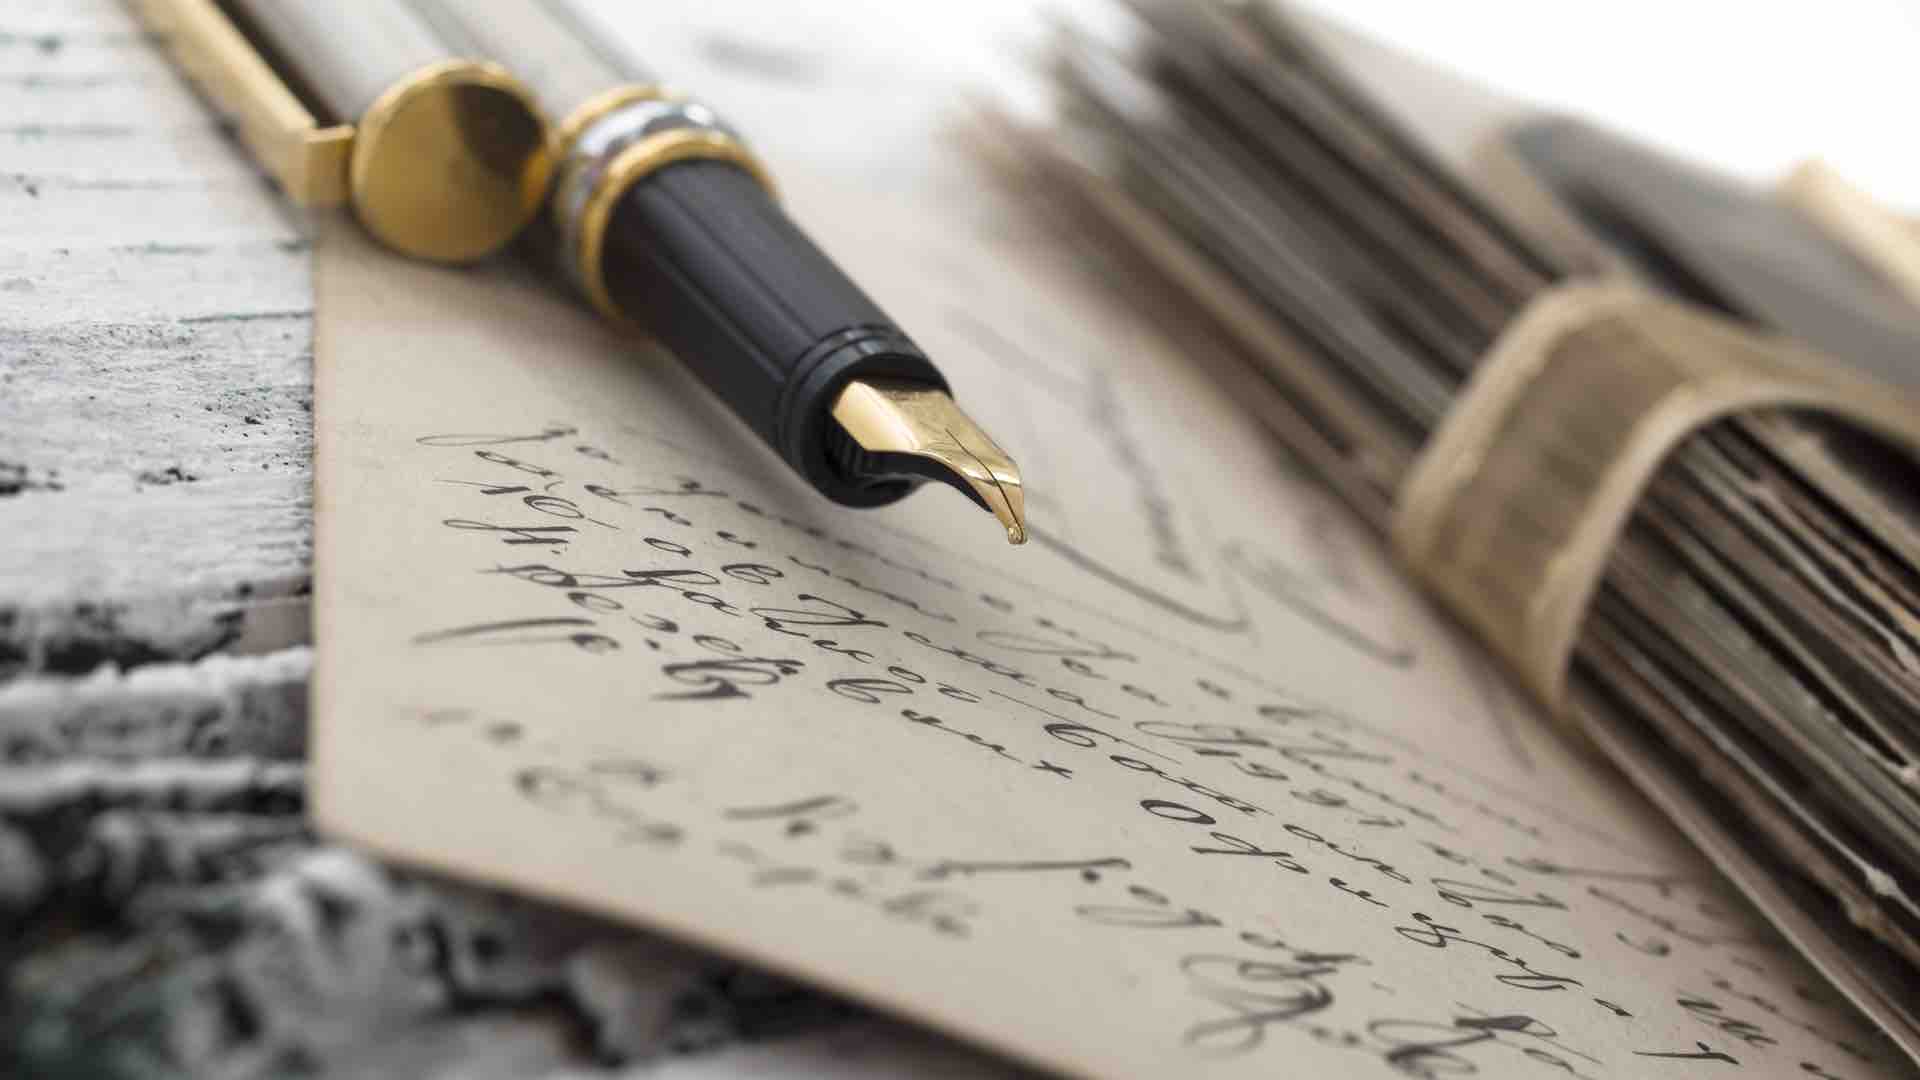 Image of a fountain pen and written work corresponding to the testimonial page